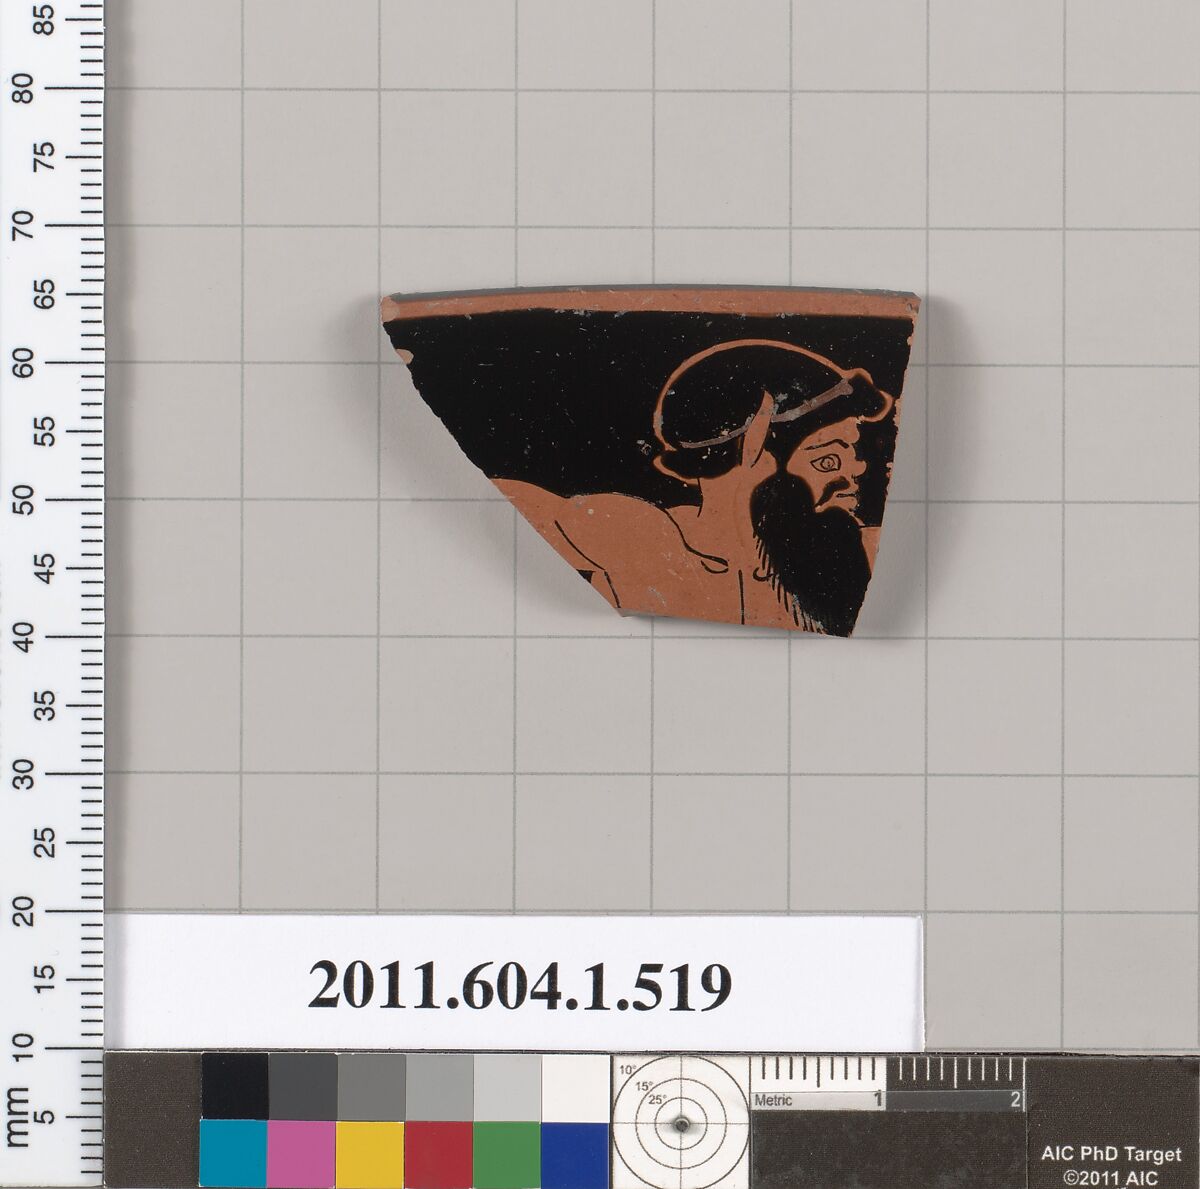 Terracotta rim fragment of a kylix (drinking cup), Attributed to Douris [DvB], Terracotta, Greek, Attic 